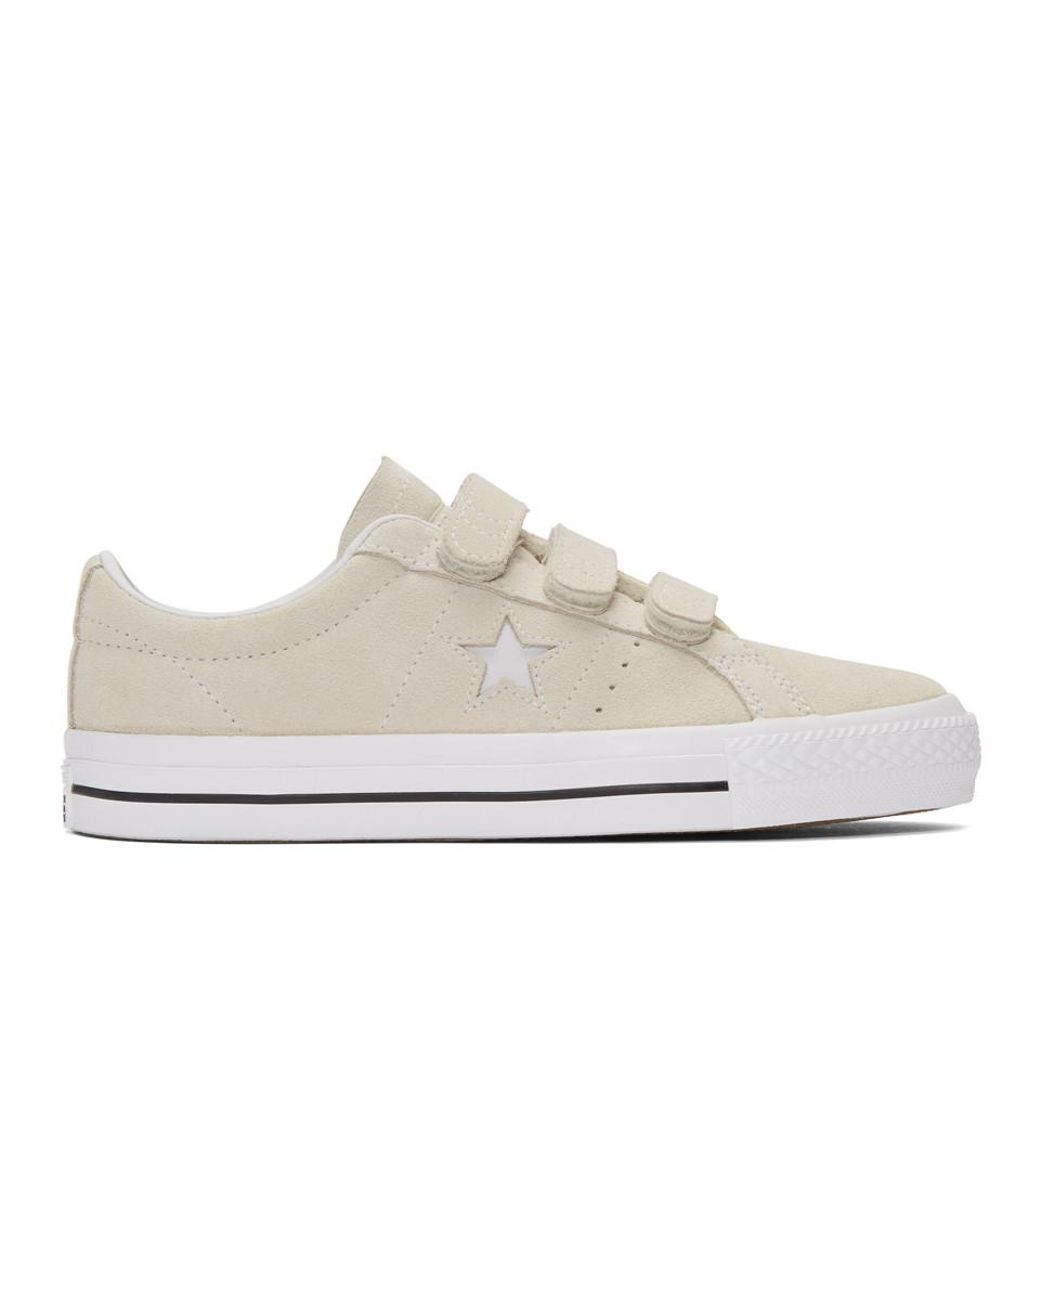 Converse Off-white One Sneakers for Men Lyst